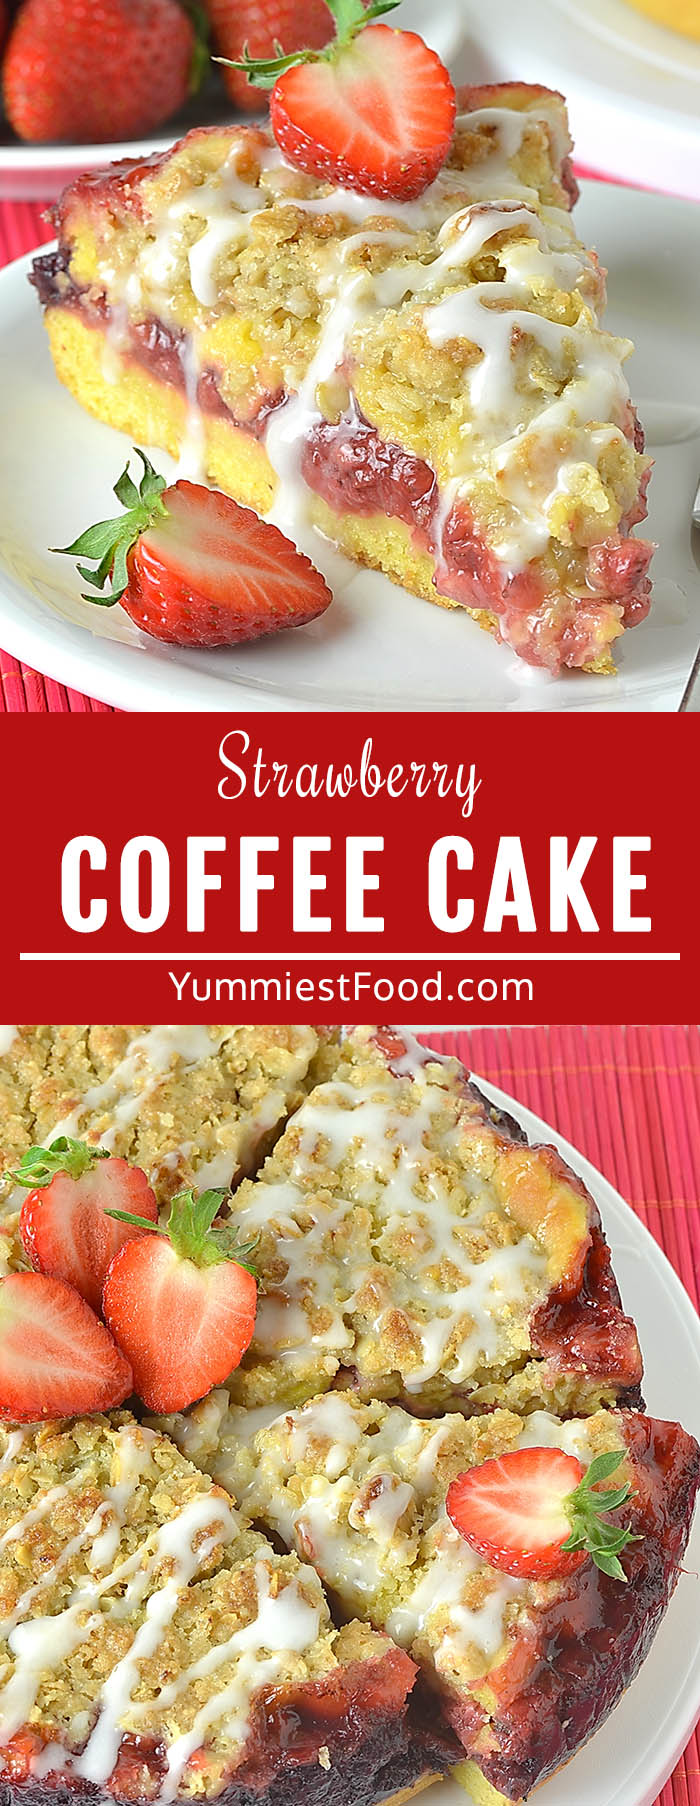 Easy and delicious Strawberry Coffee Cake is the perfect cake to make during strawberry season. Great with a cup of good coffee!